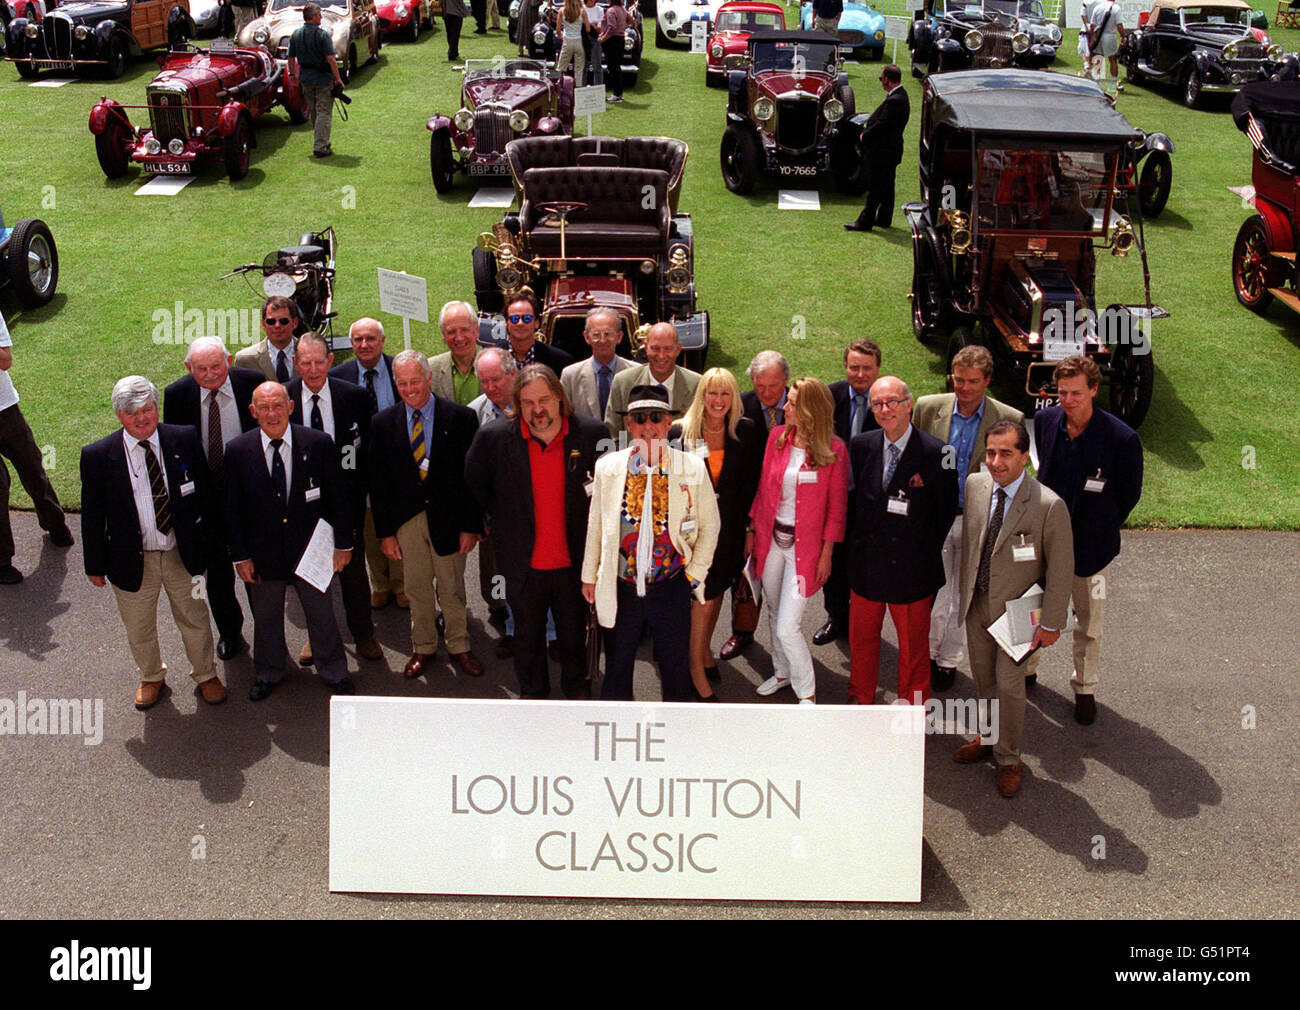 The judges of the Louis Vuitton Classic, a classic car and